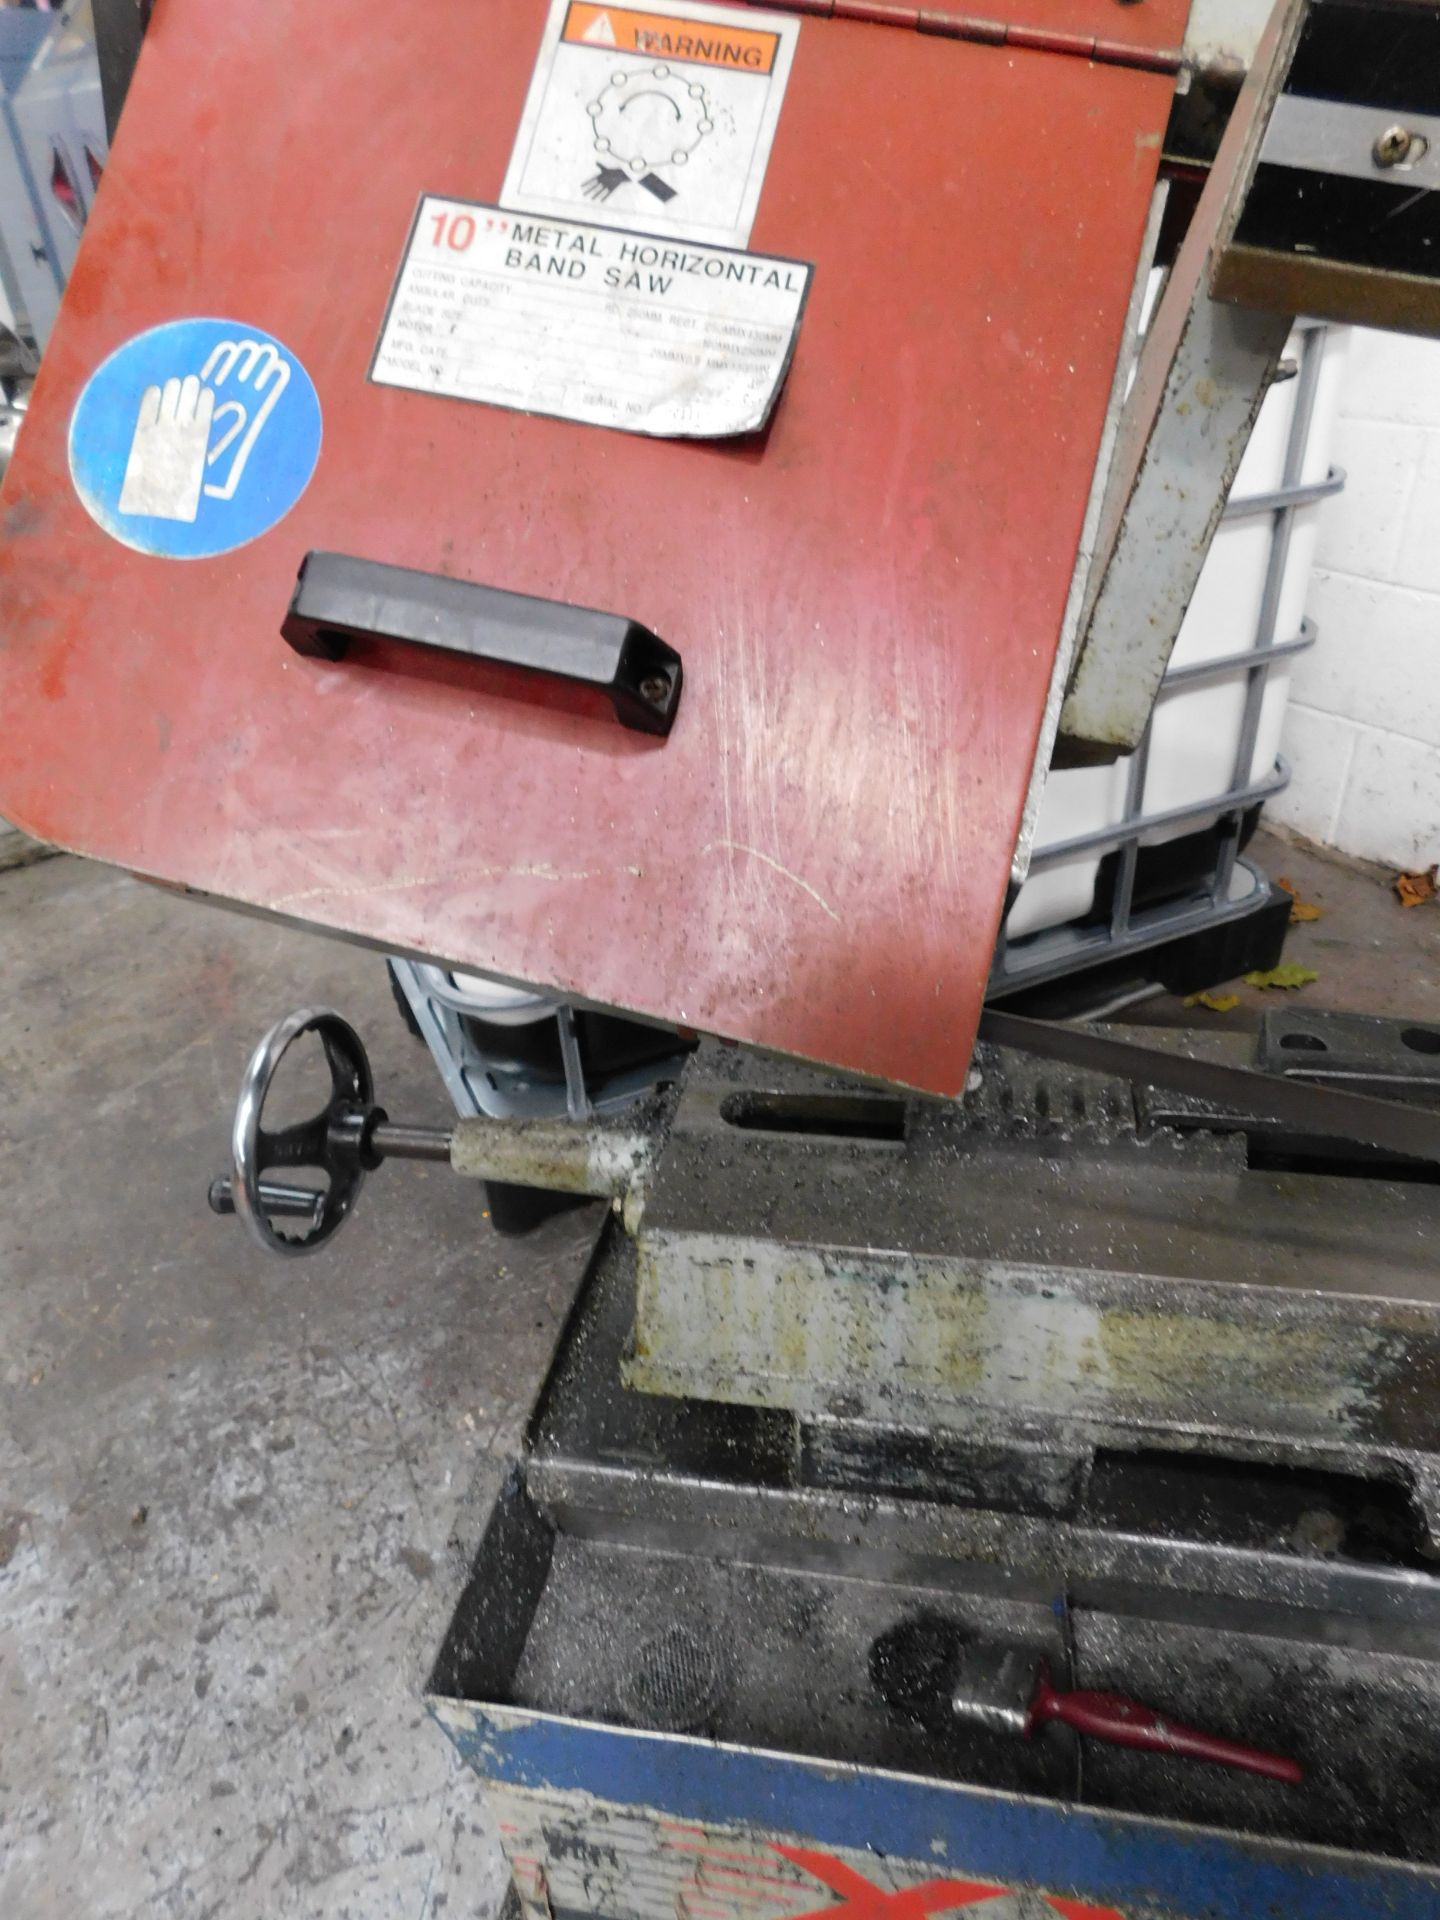 XYZ 260 10in Metal Horizontal Band Saw, Serial Number 00111220 (2000)  (Located North Manchester. - Image 6 of 10